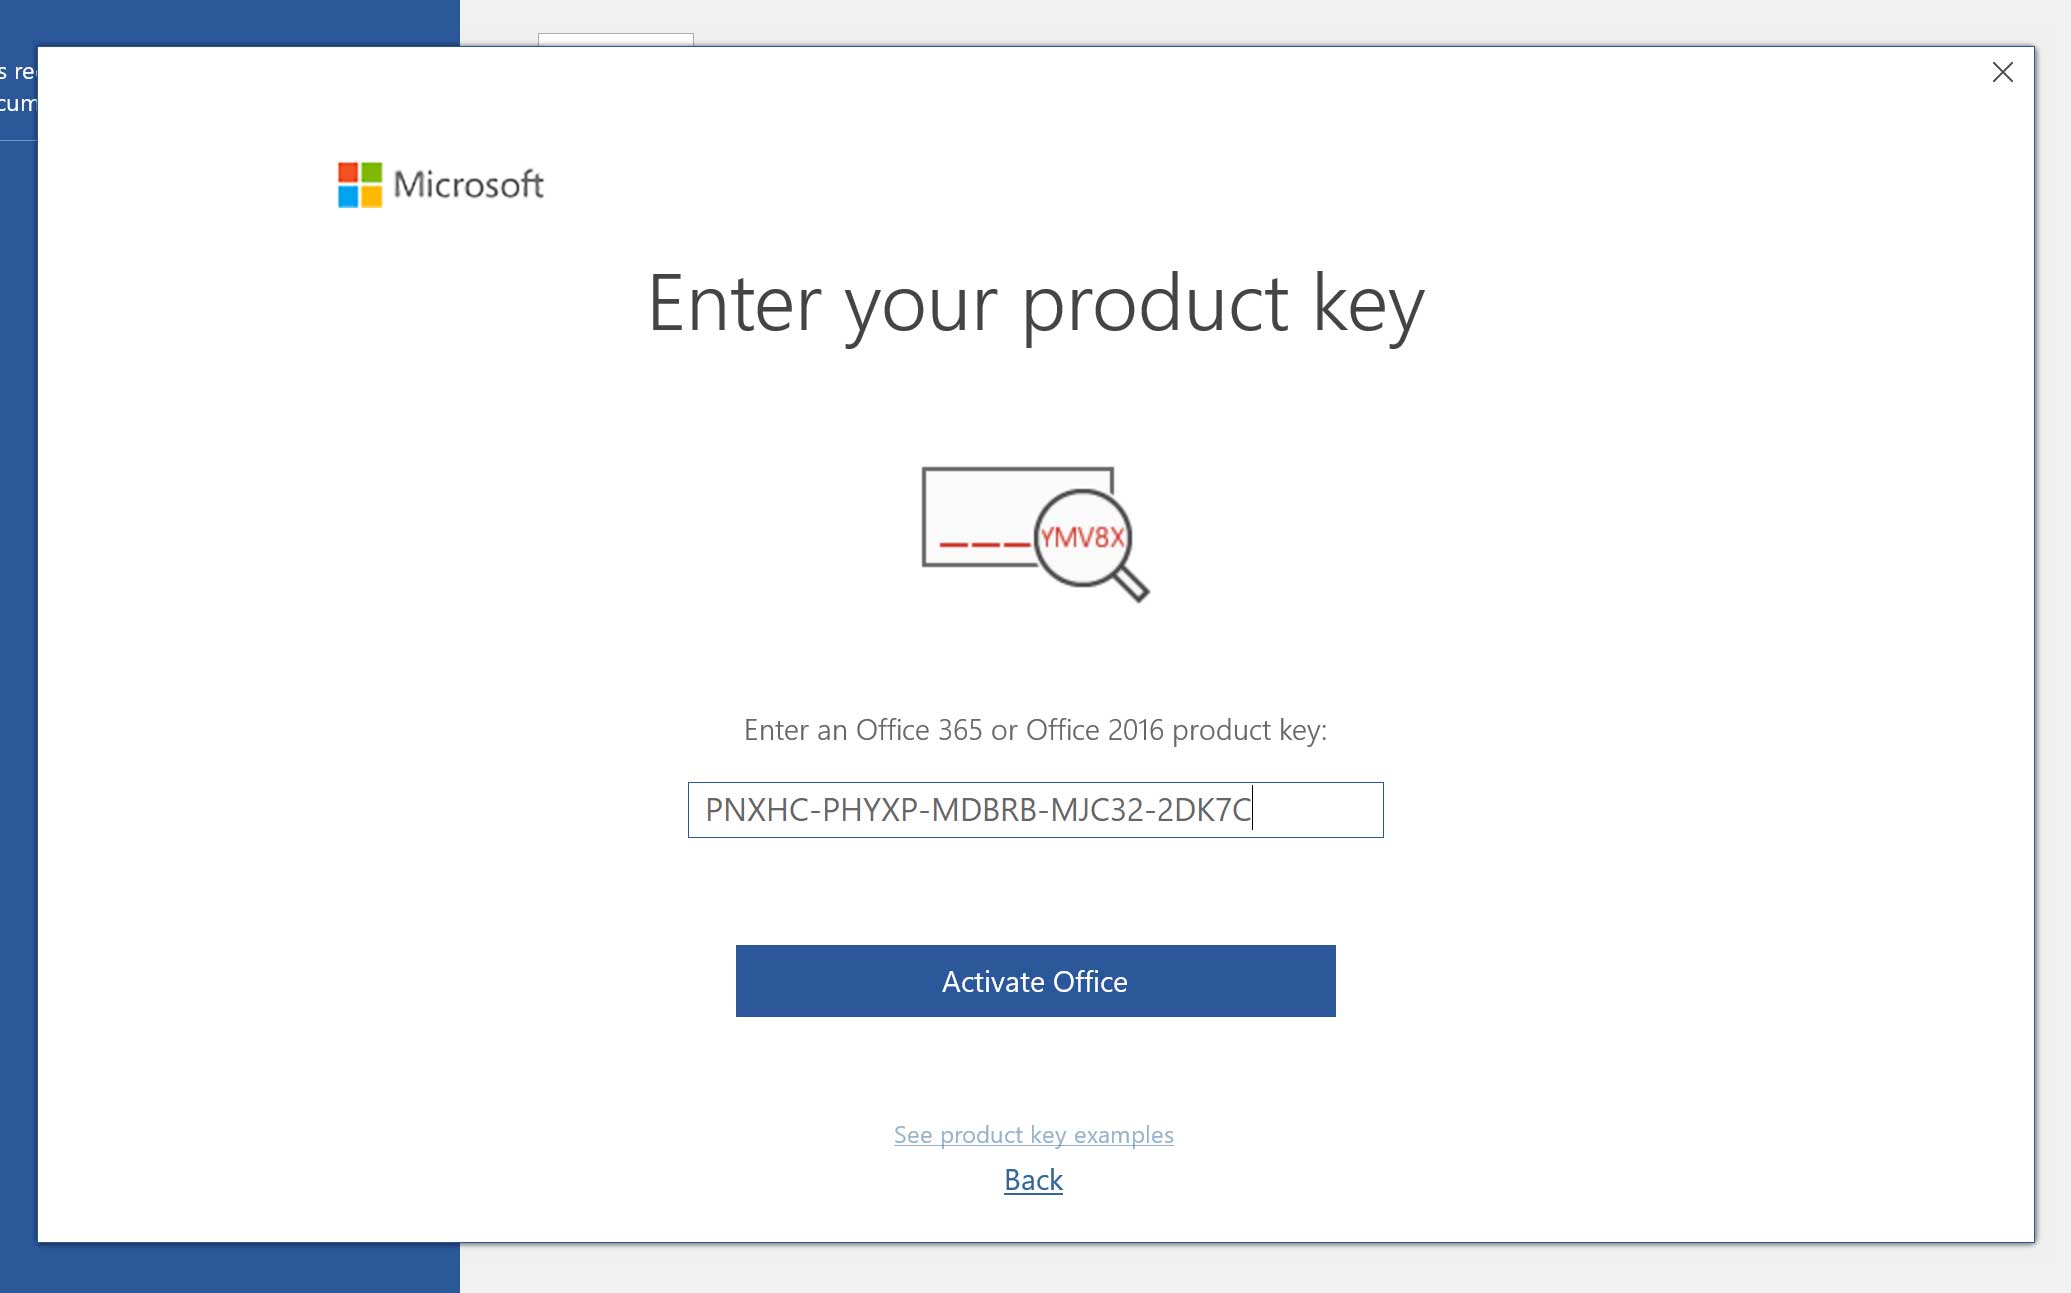 ms office 365 activation code